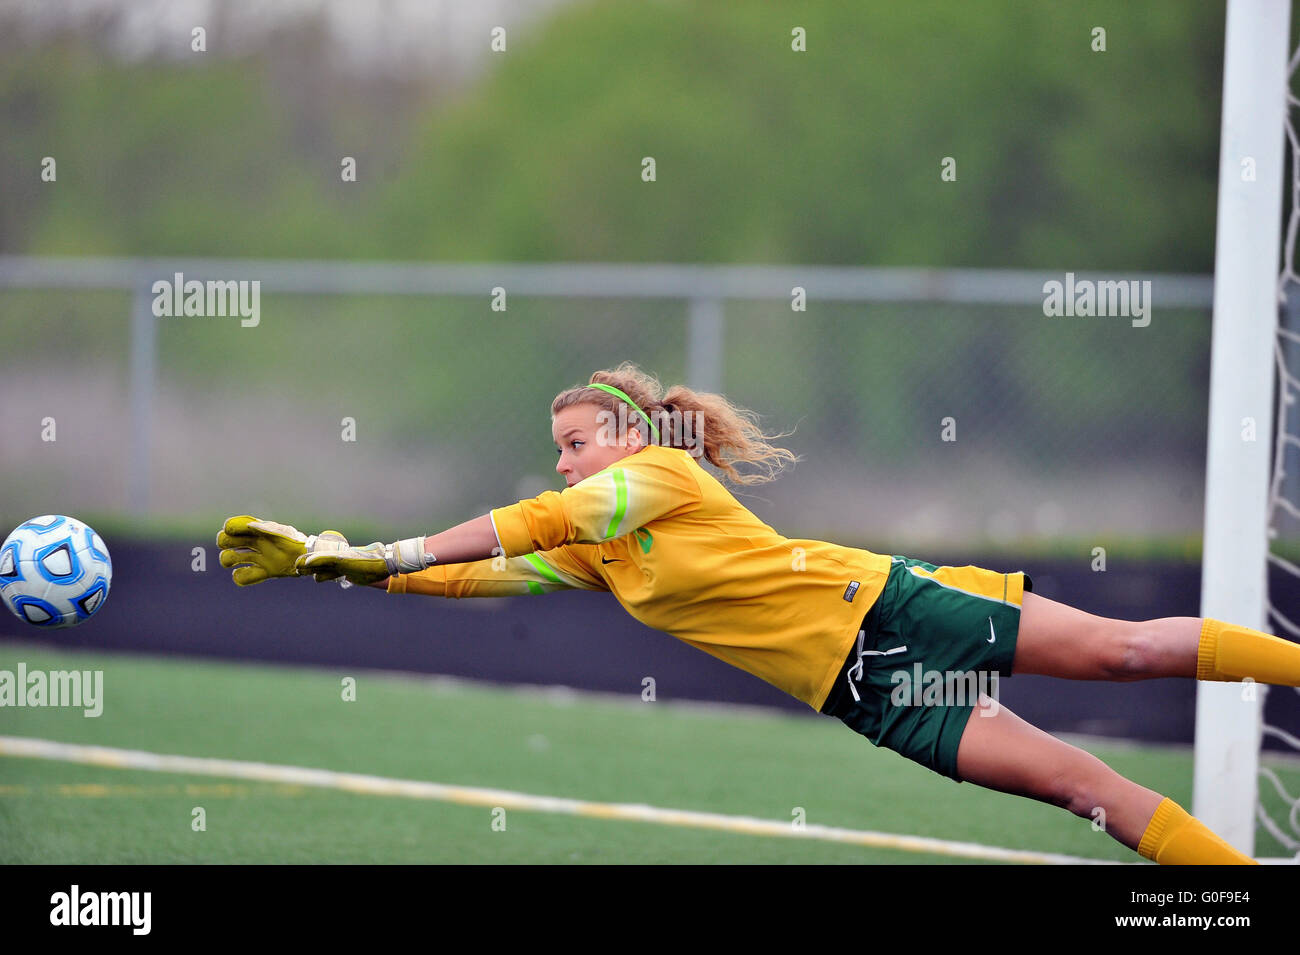 A sprawling keeper diving to prevent a crossing pass from finding an open opponent during a high school soccer match. USA. Stock Photo